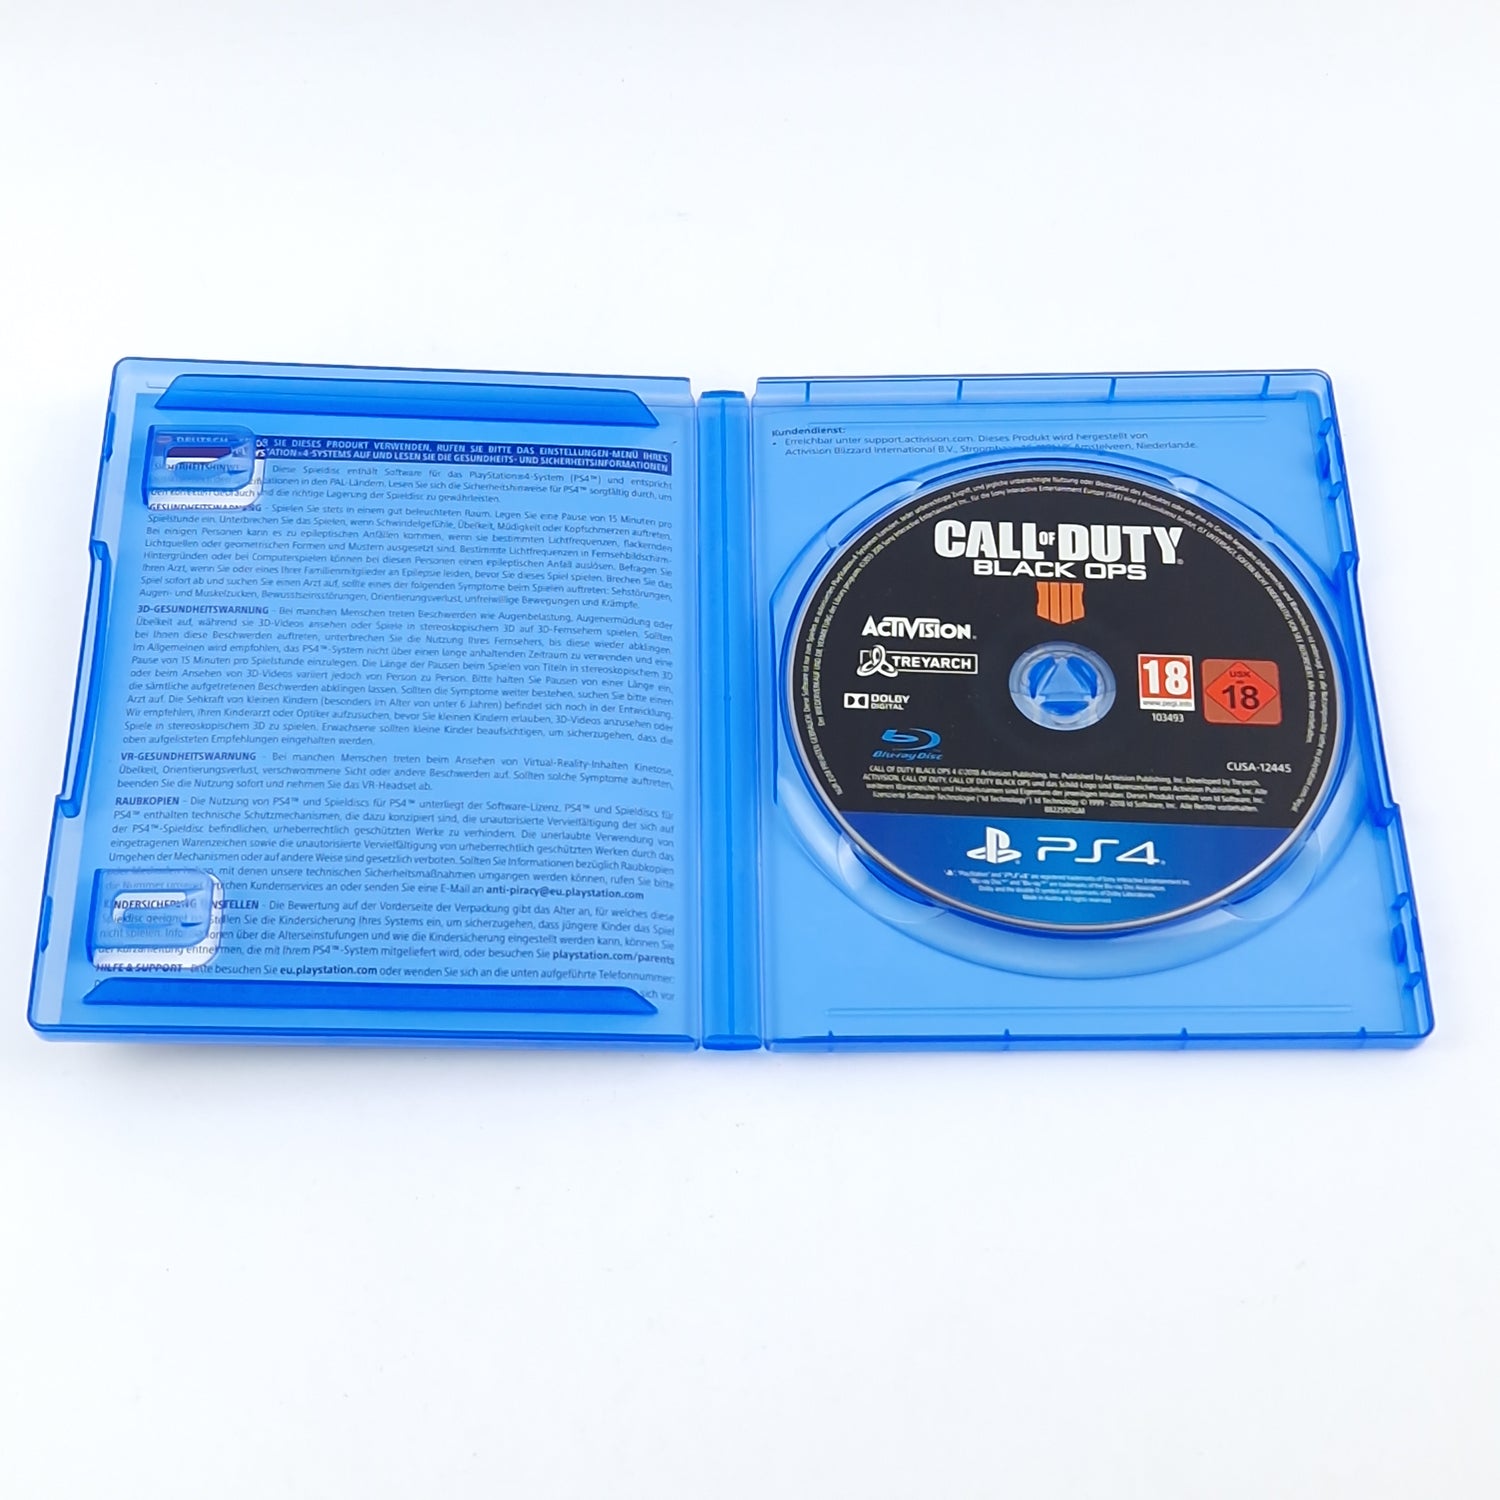 Playstation 4 Spiel : Call of Duty Black Ops - OVP Anleitung CD - SONY PS4 USK18